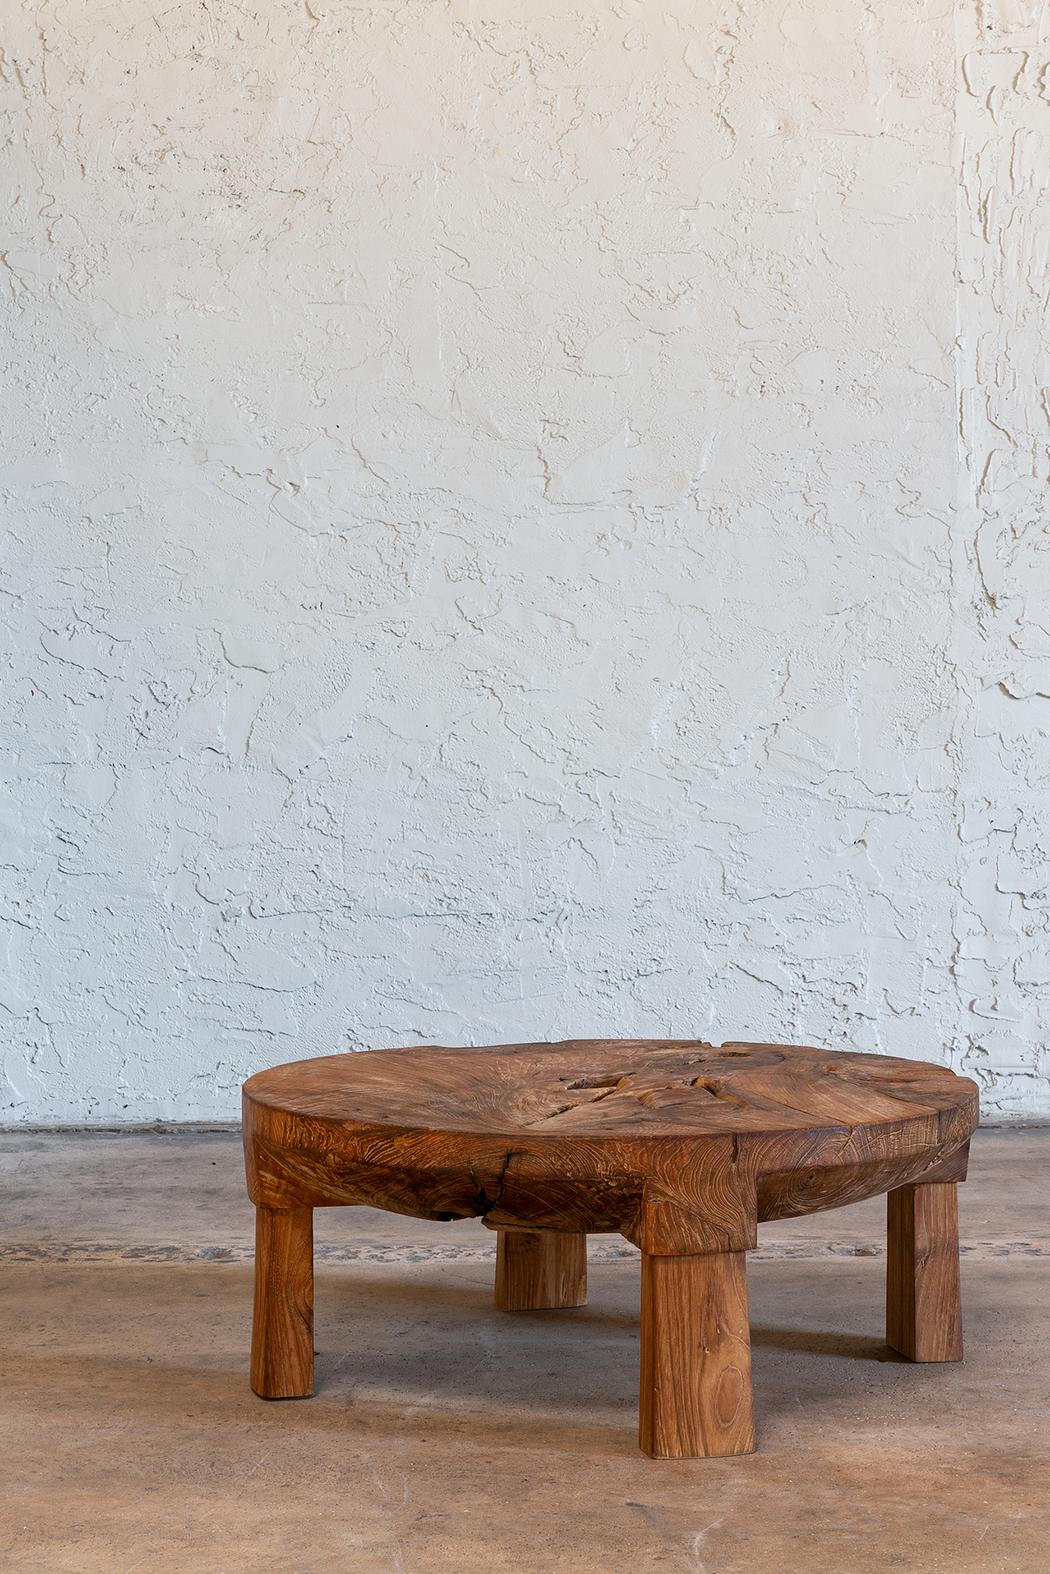 Solo antique round table